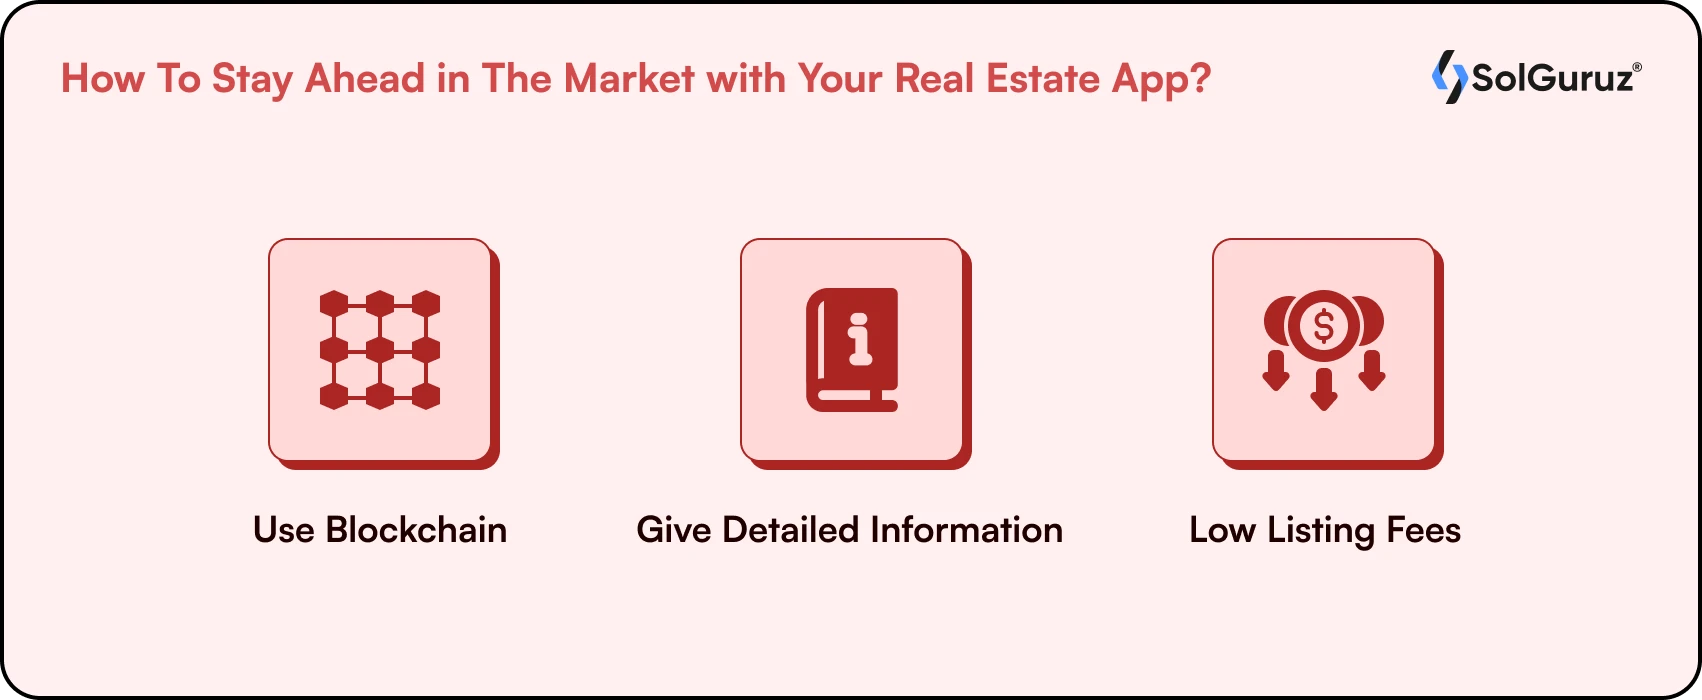 How To Stay Ahead in The Market with Your Real Estate App